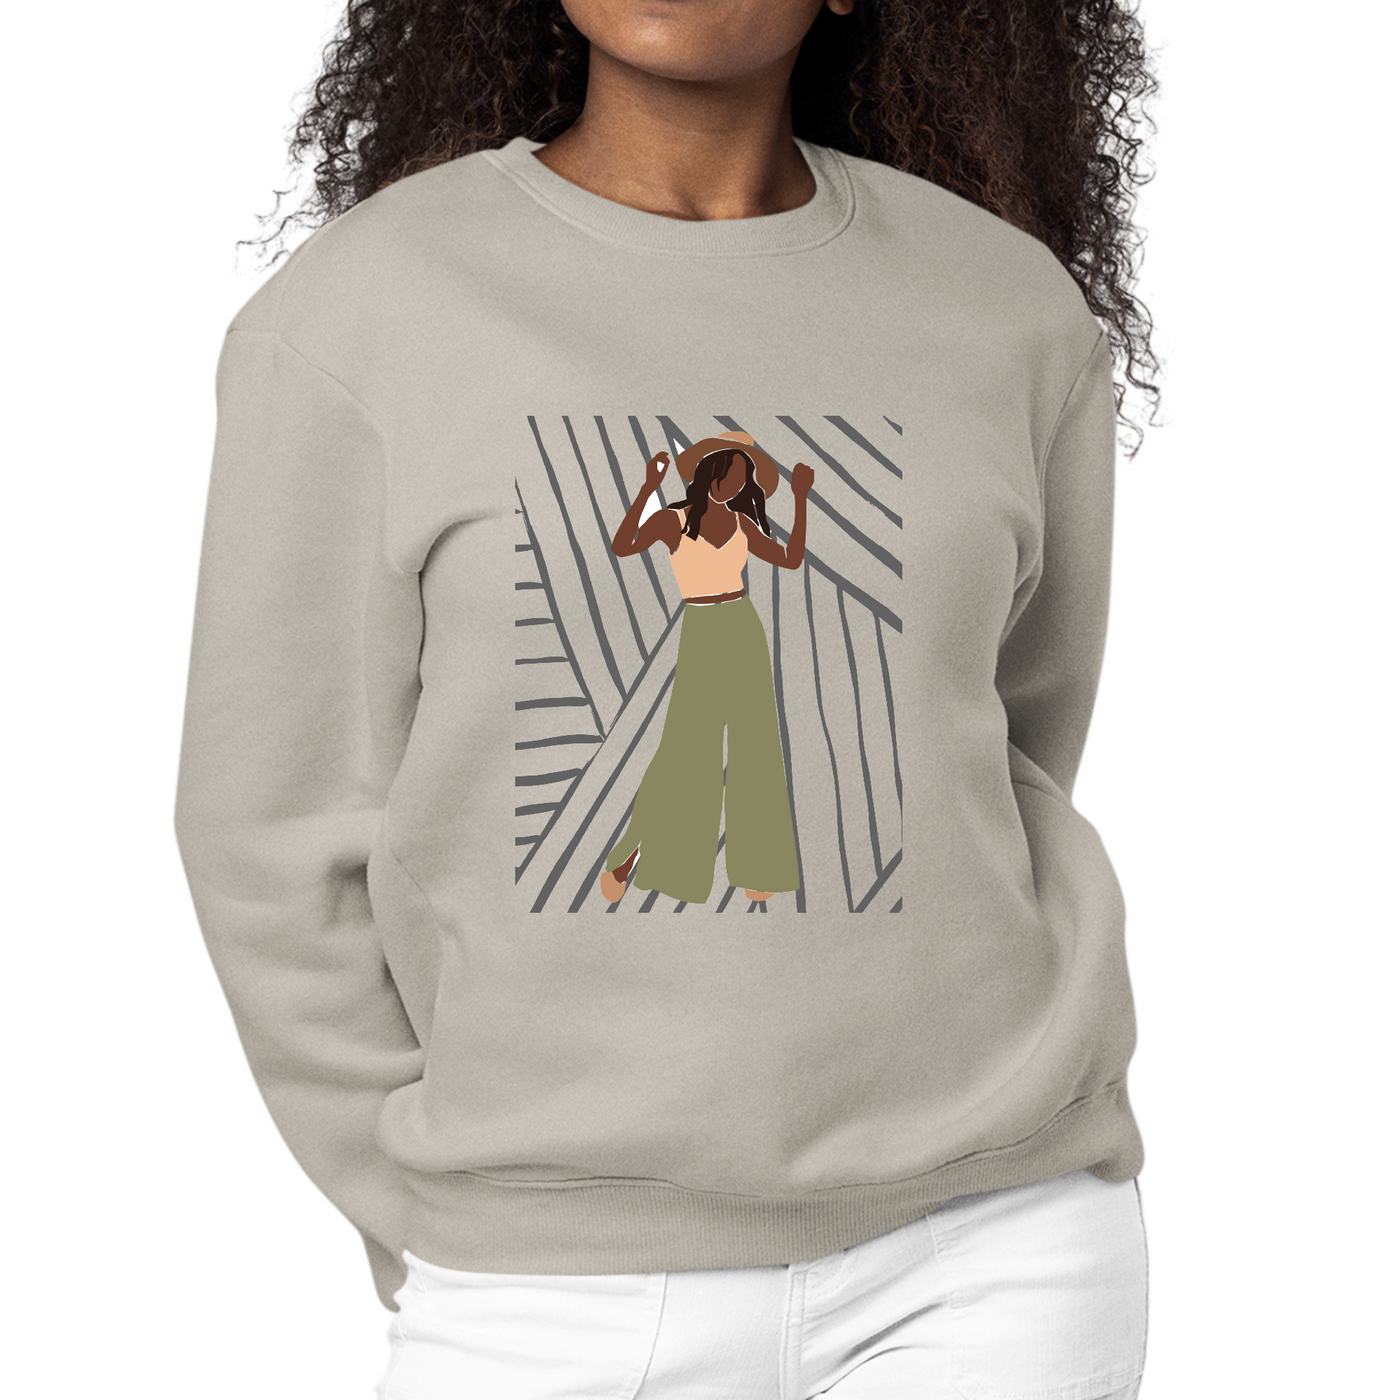 Womens Graphic Sweatshirt Say It Soul Its Her Groove Thing Positive - Womens